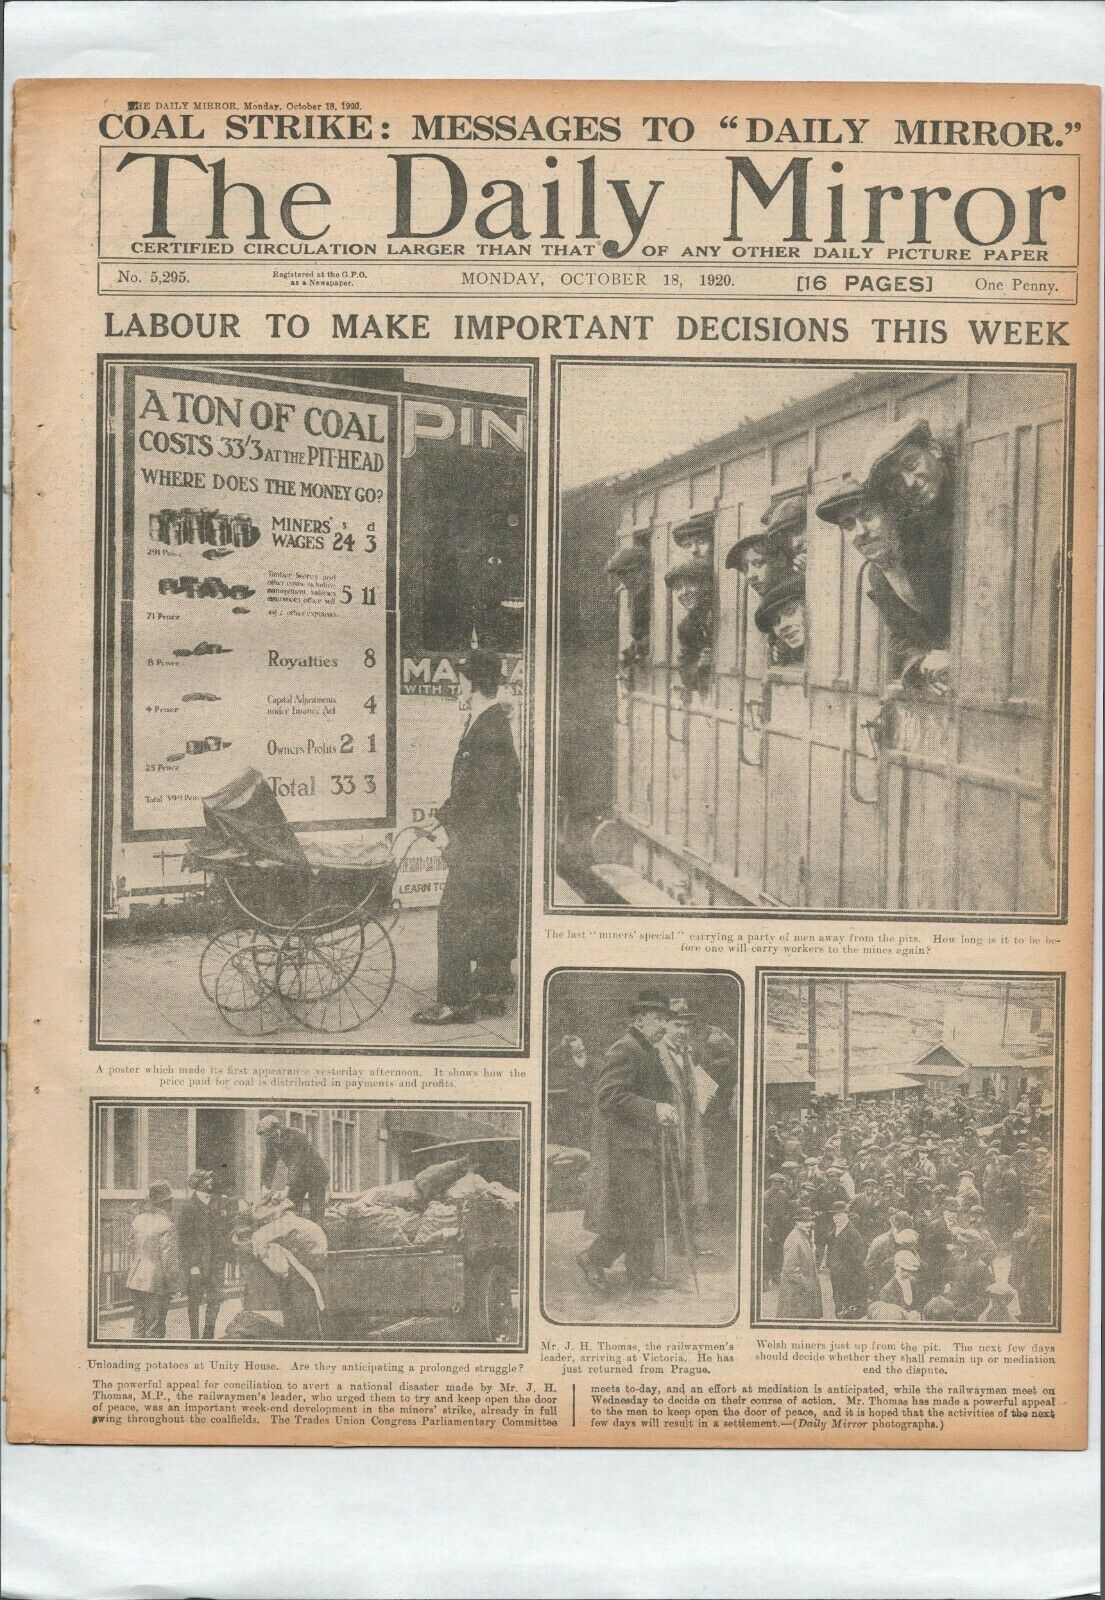 6 Original Antique Daily Mirror Newspapers 1920 Covering The Great Minersê Strike - Image 2 of 6